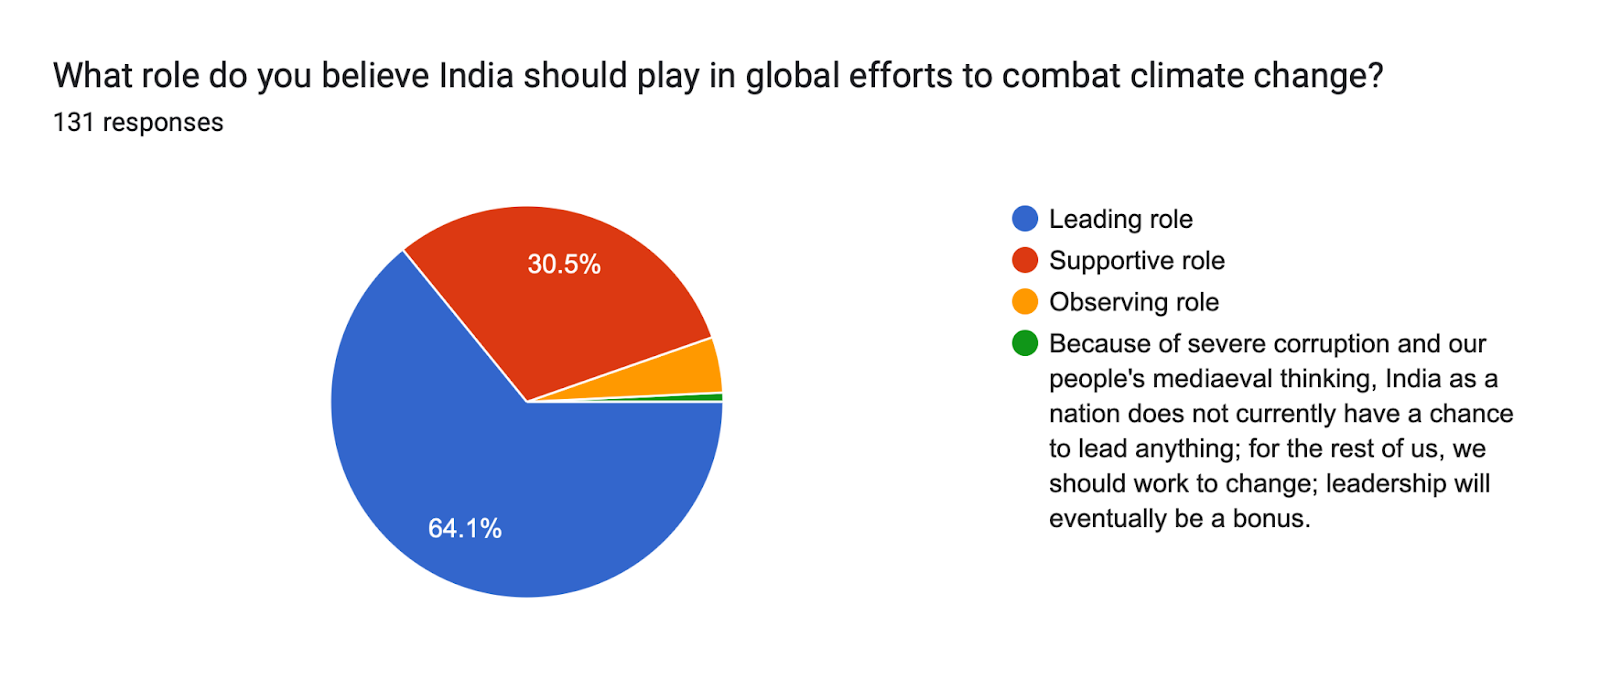 Forms response chart. Question title: What role do you believe India should play in global efforts to combat climate change?. Number of responses: 131 responses.